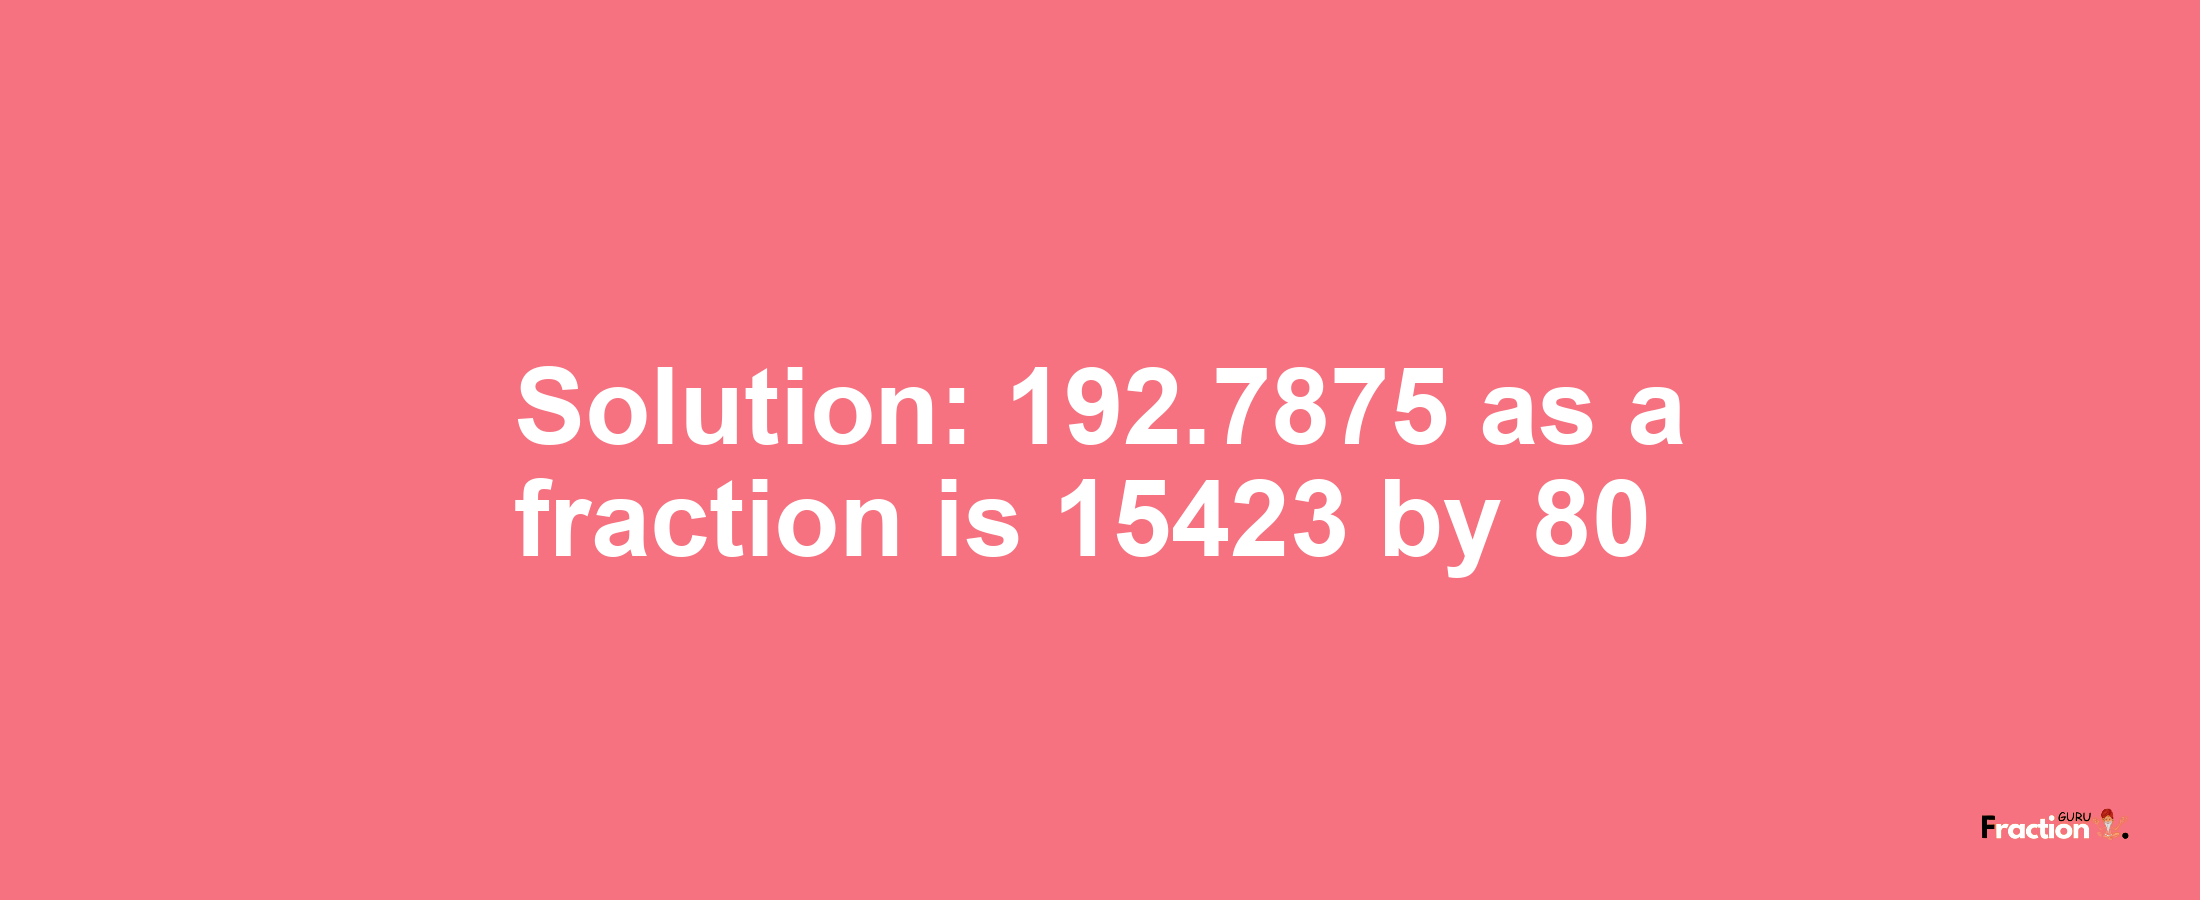 Solution:192.7875 as a fraction is 15423/80